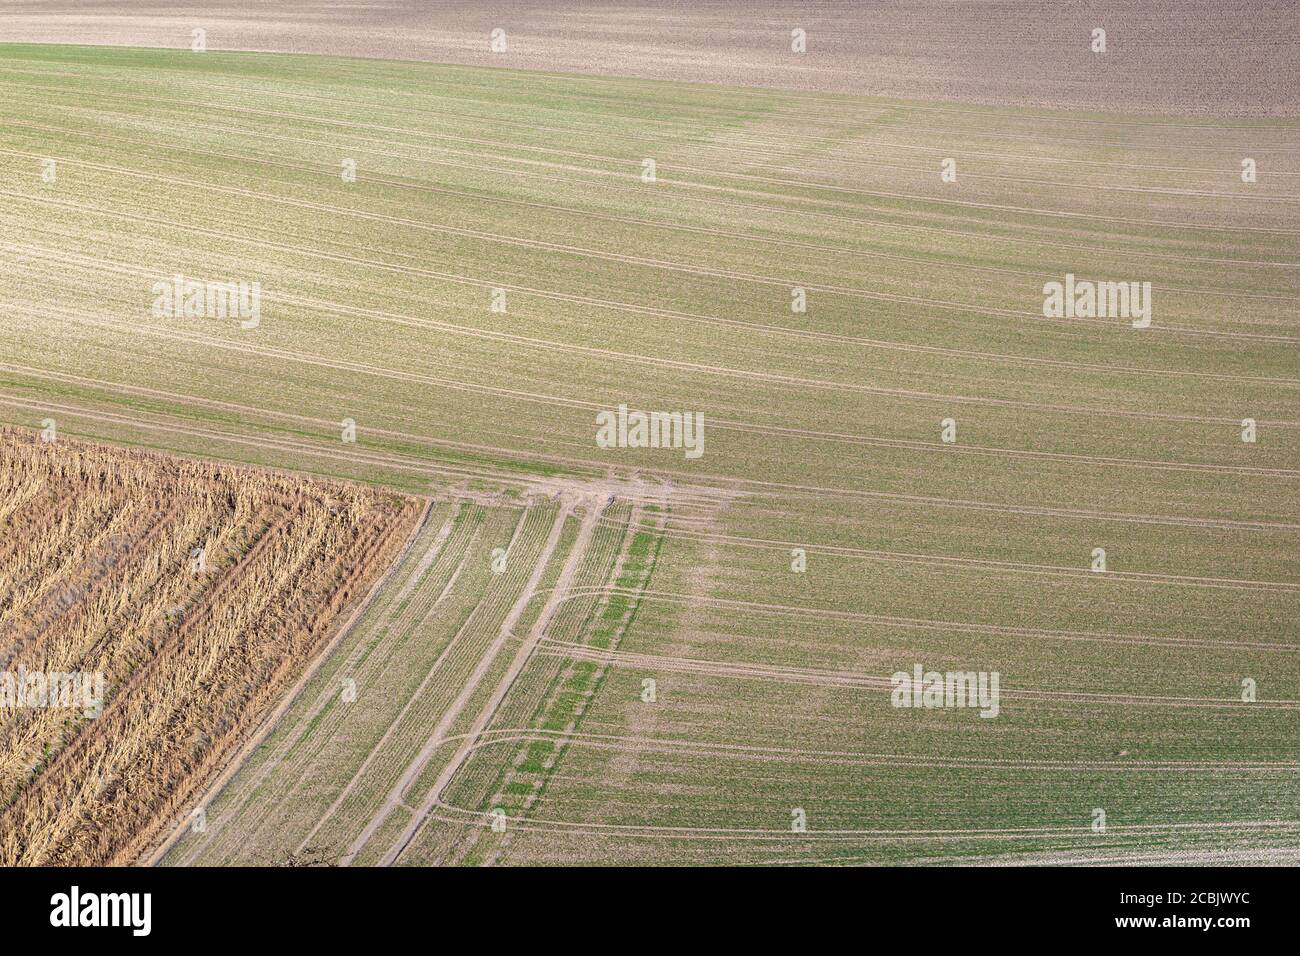 A full frame photograph looking down on patterns in farmland, on a sunny winters day Stock Photo